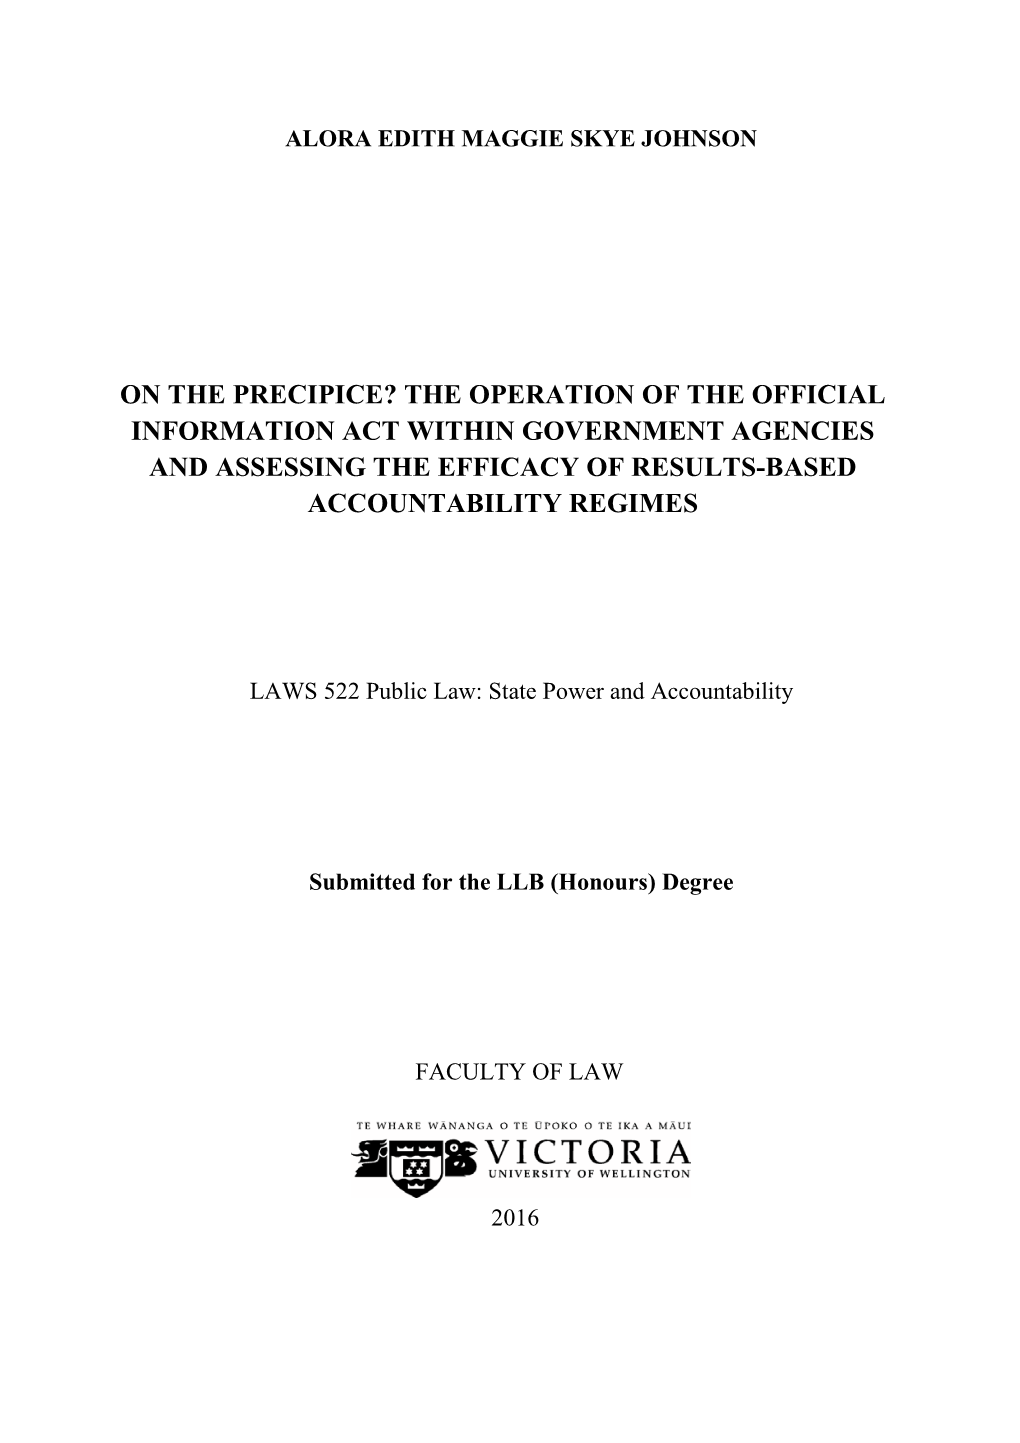 On the Precipice? the Operation of the Official Information Act Within Government Agencies and Assessing the Efficacy of Results-Based Accountability Regimes